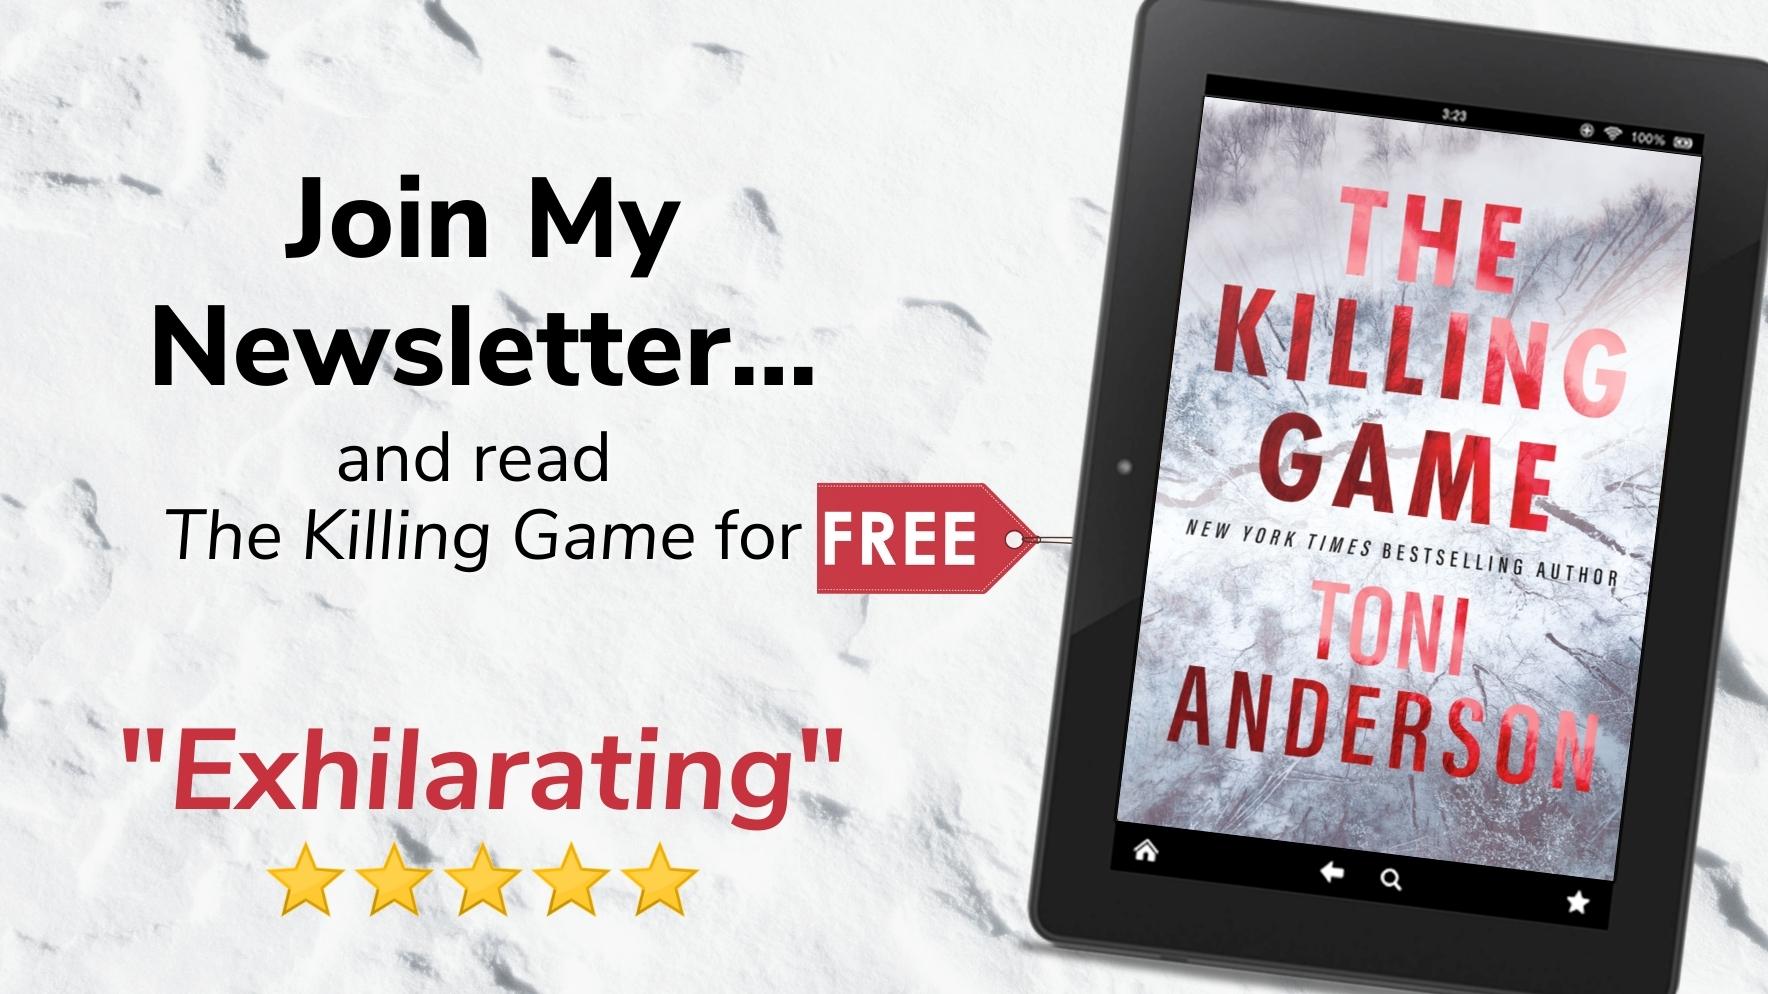 Join my newsletter and read The Killing Game for free